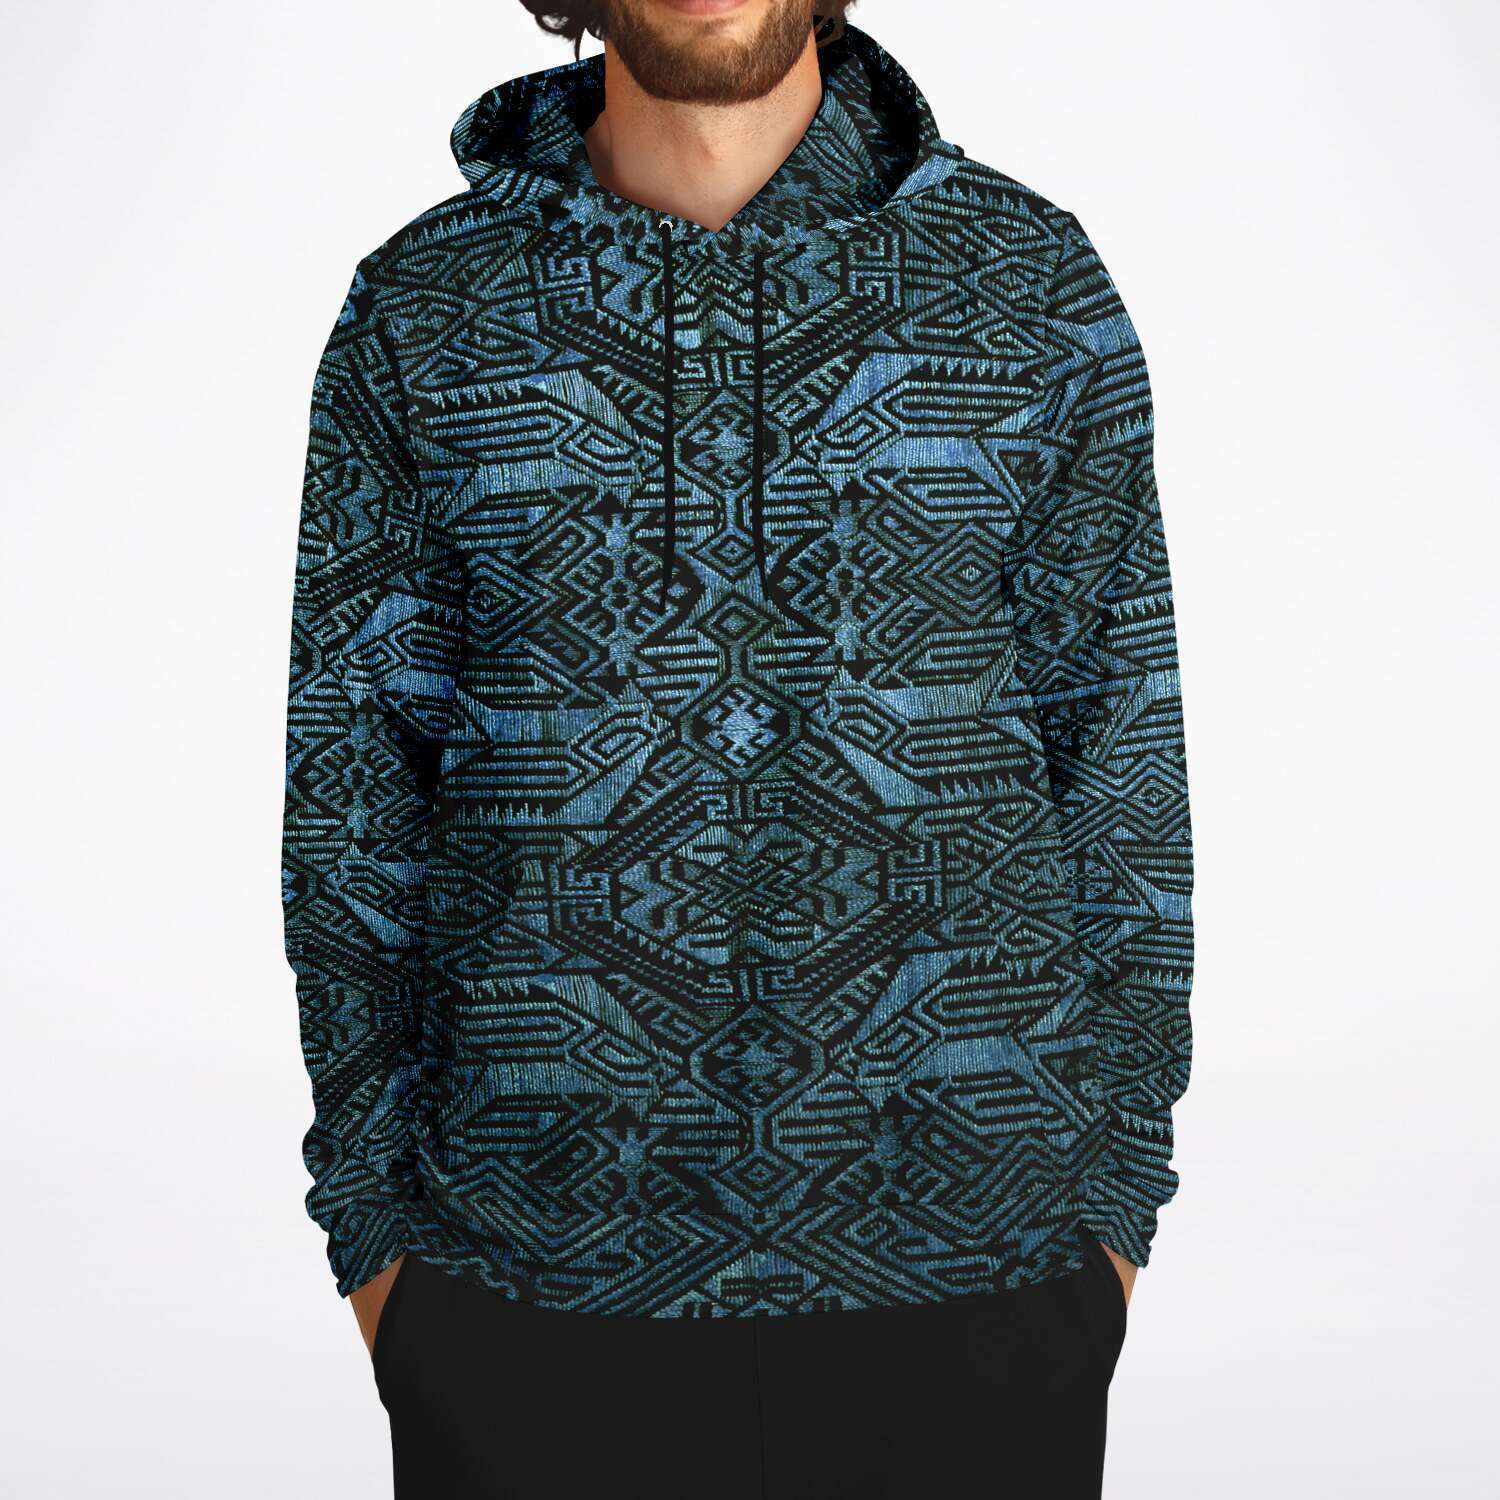 Fashion Hoodie - AOP Modern Oceanic Ikat Pullover Hoodie, Inspired by Indonesian Textiles, Laos Culture, Hmong Sweaters, Thailand, and India